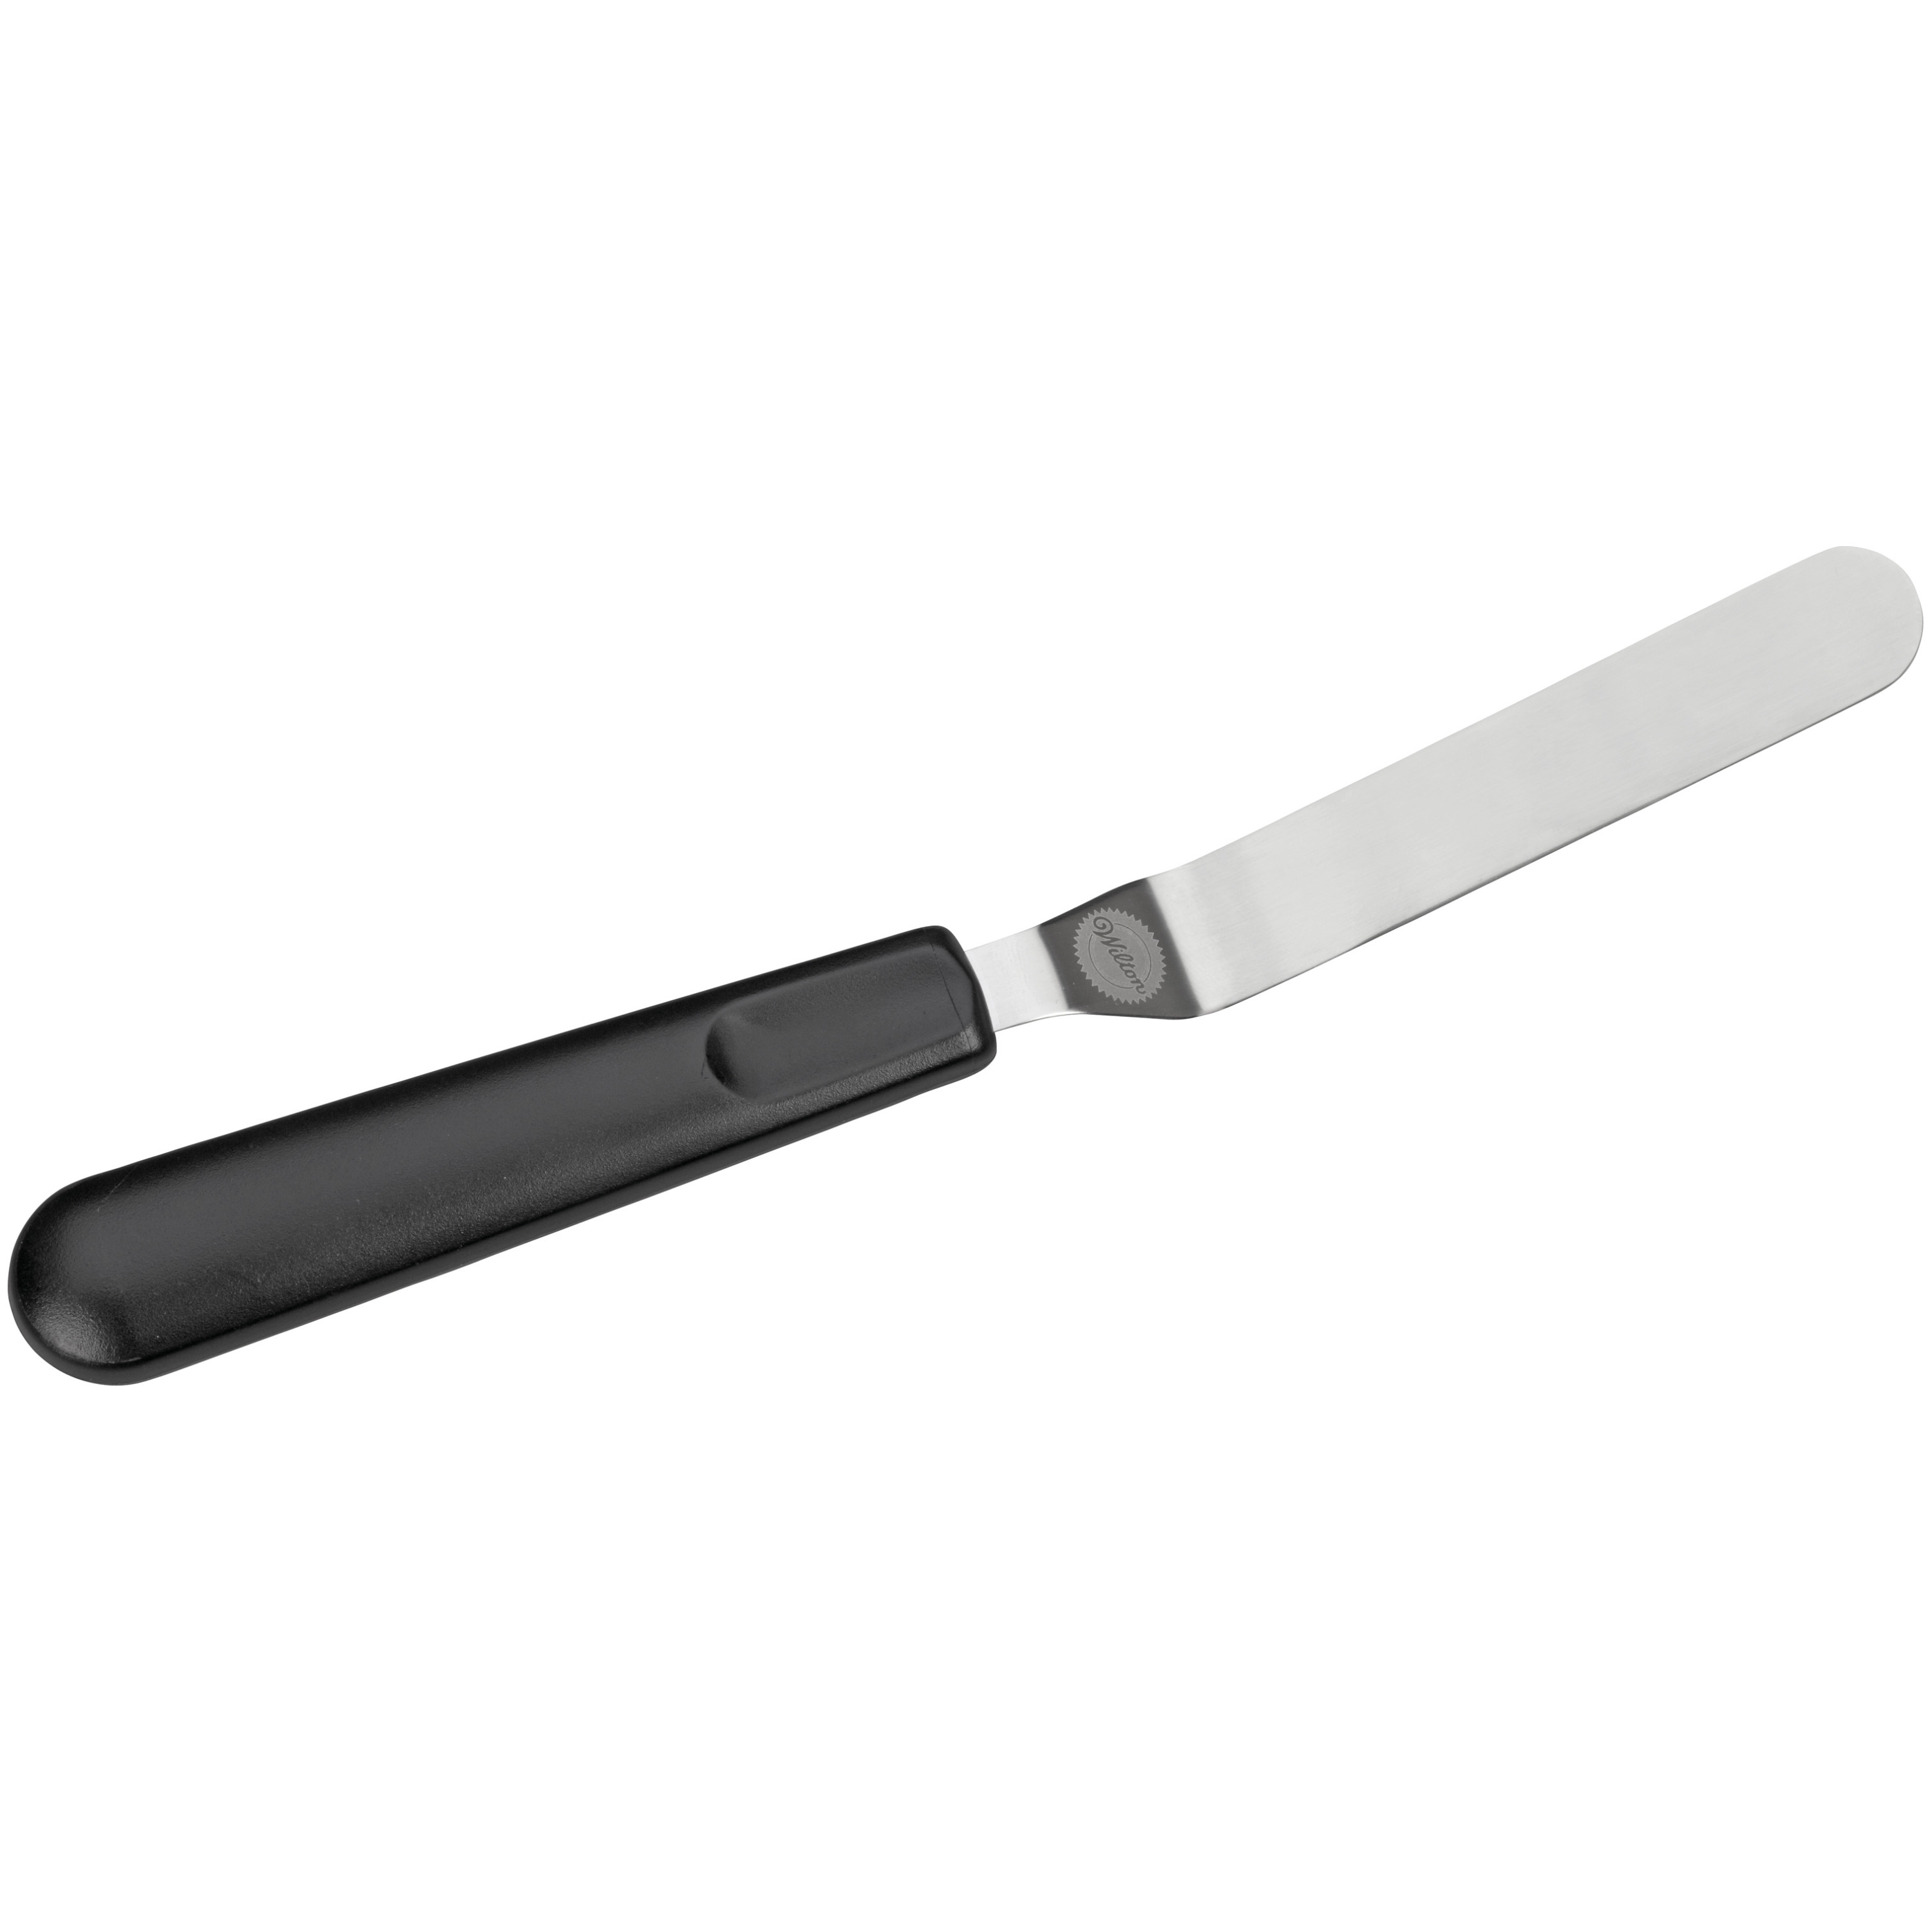 Wilton Angled Icing Spatula with Black Handle, 9-Inch - image 3 of 6